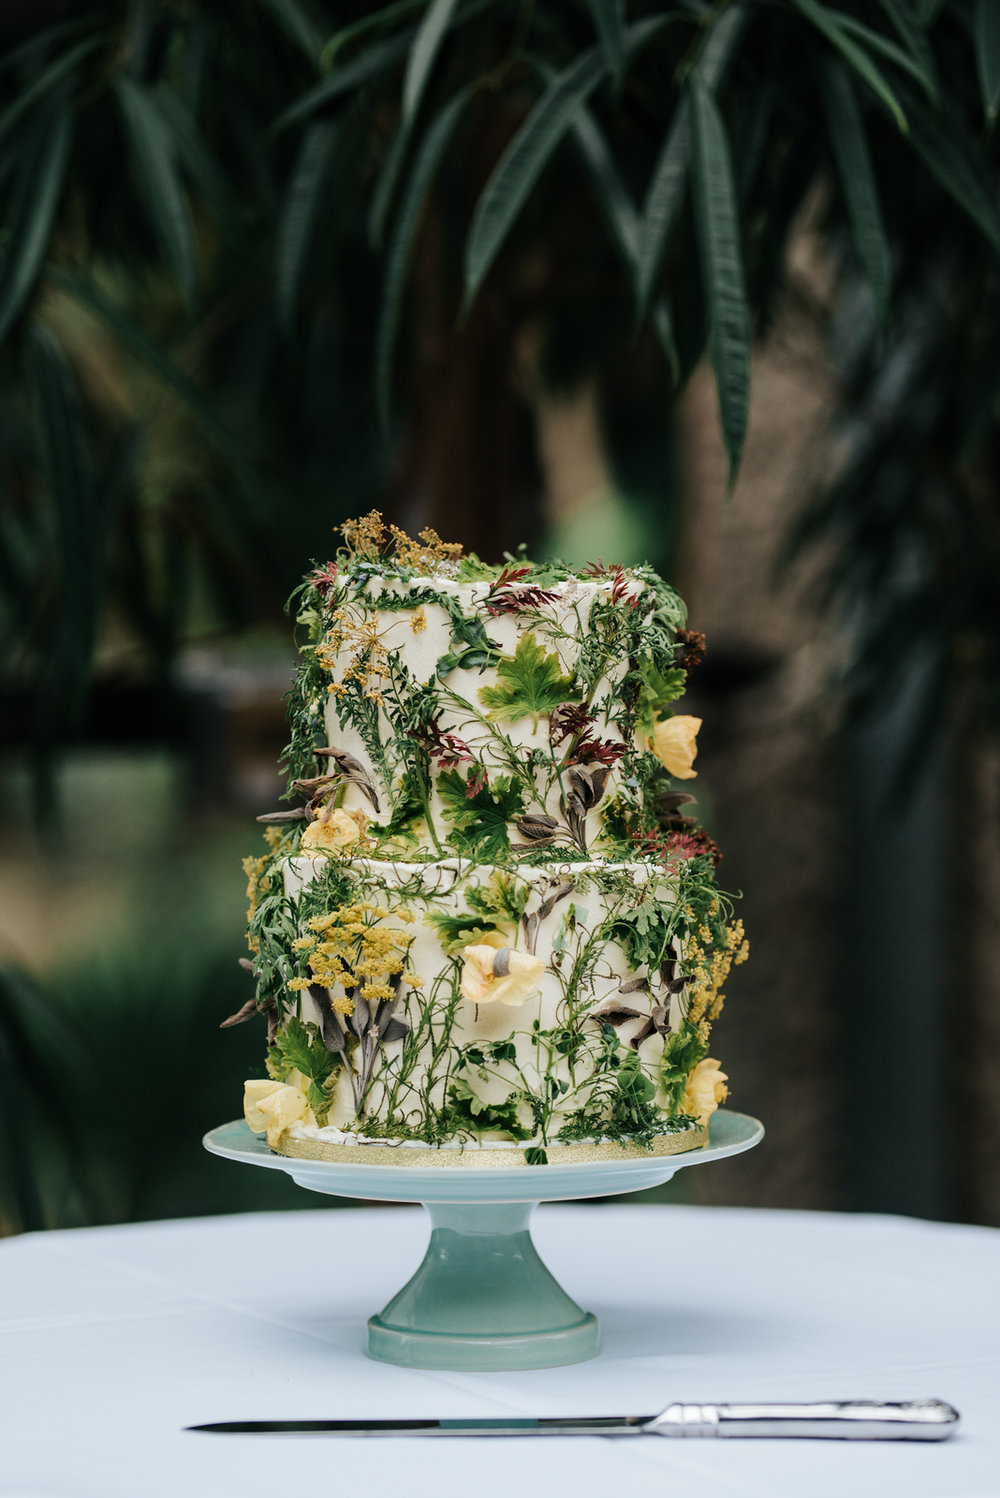 Detail photograph of stunning wedding cake decorated with shrubs